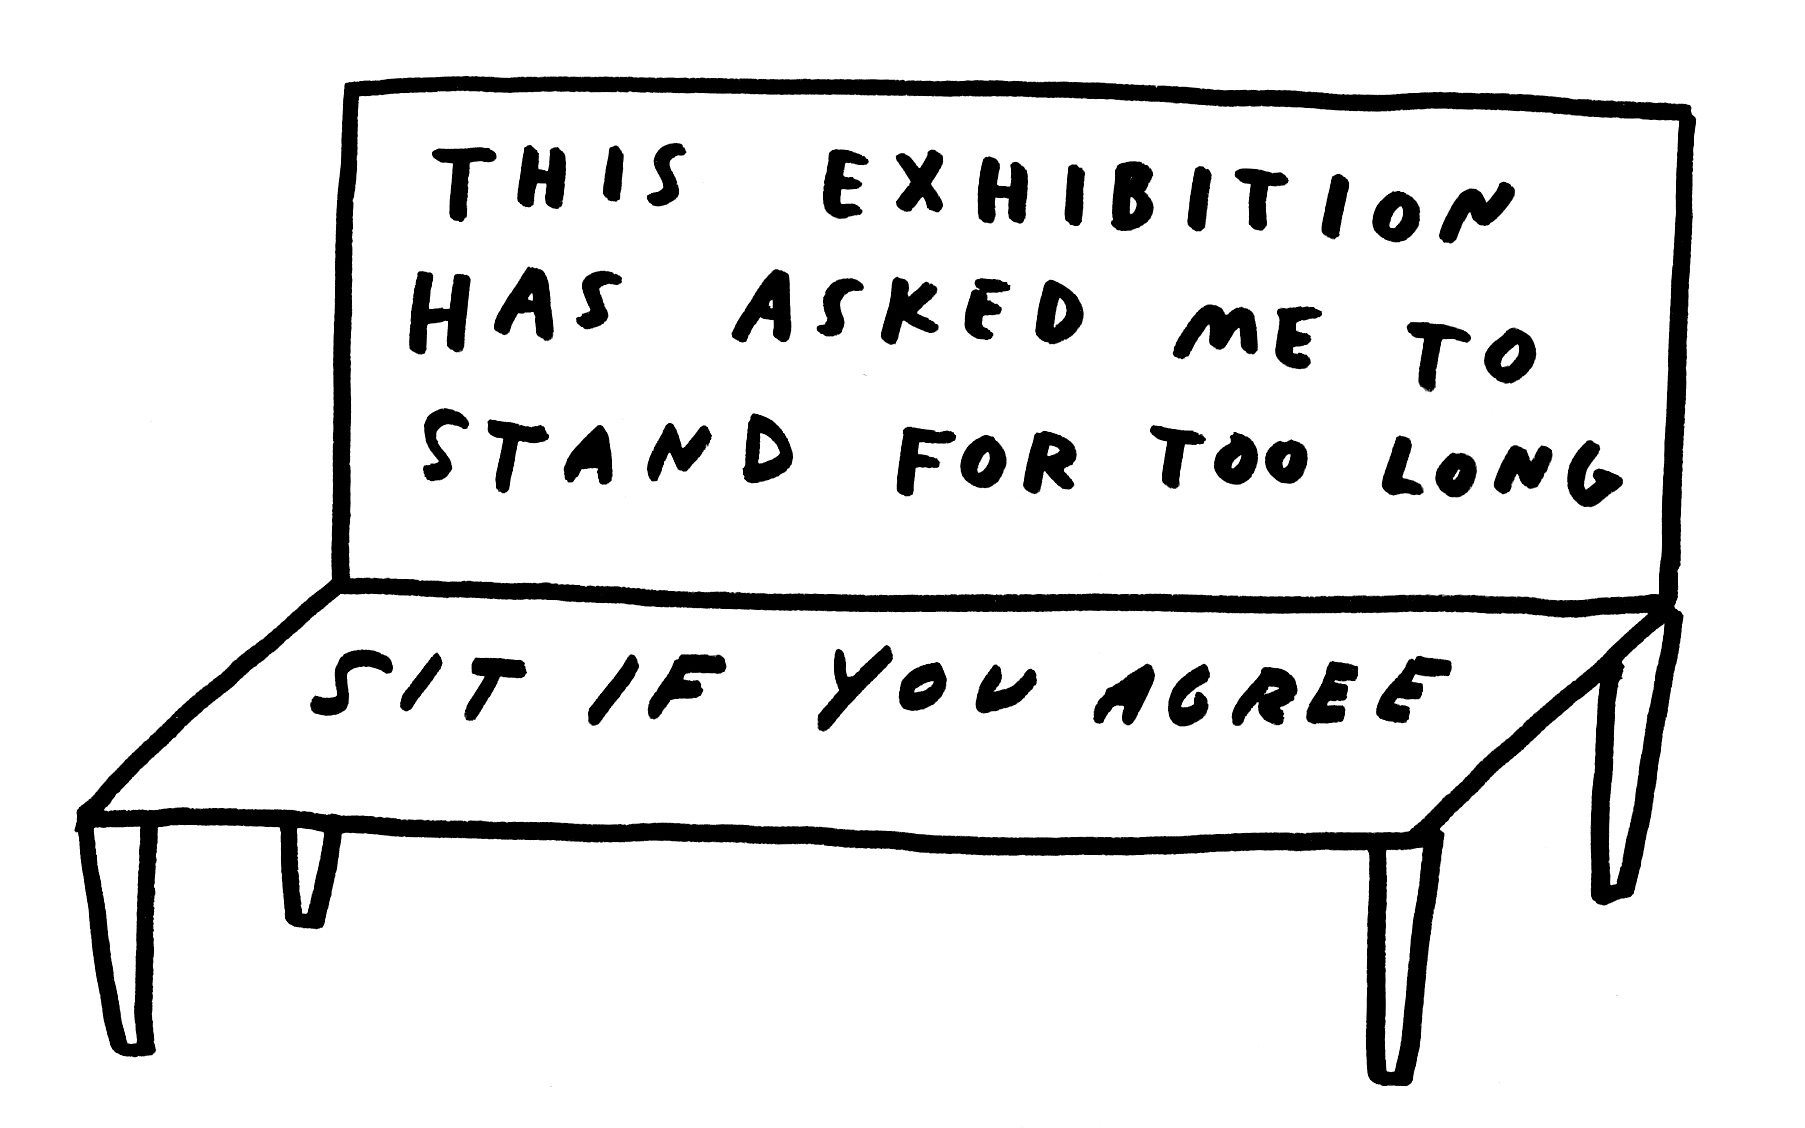 drawn bench with text this exhibition has asked me to stand for too long, sit if you agree